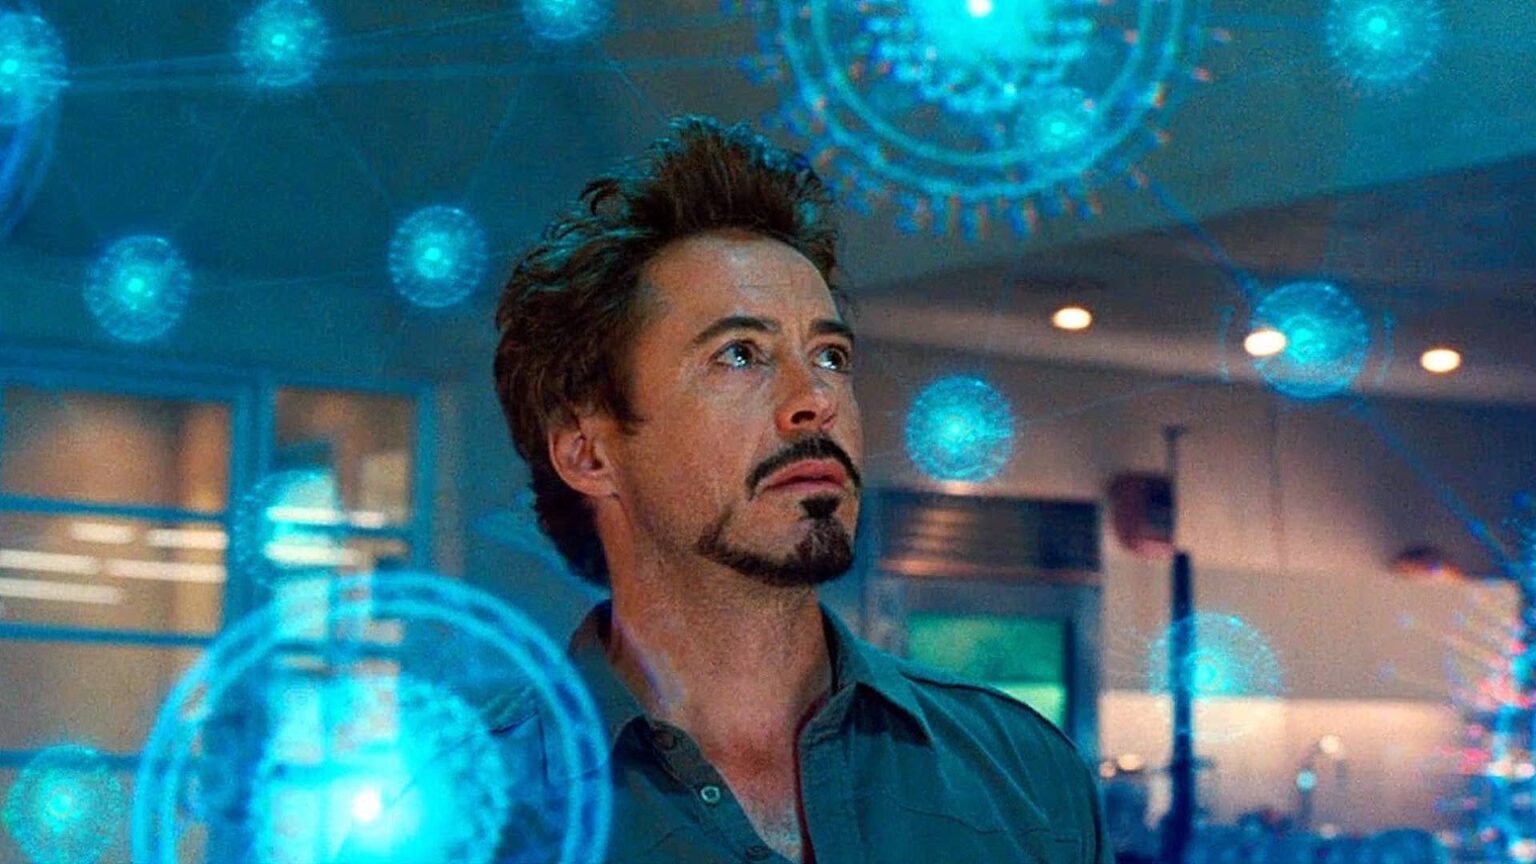 You know him best as his iconic role as 'Ironman', but the actor has had a long & prolific career. Find out the net worth of Robert Downey Jr. here.